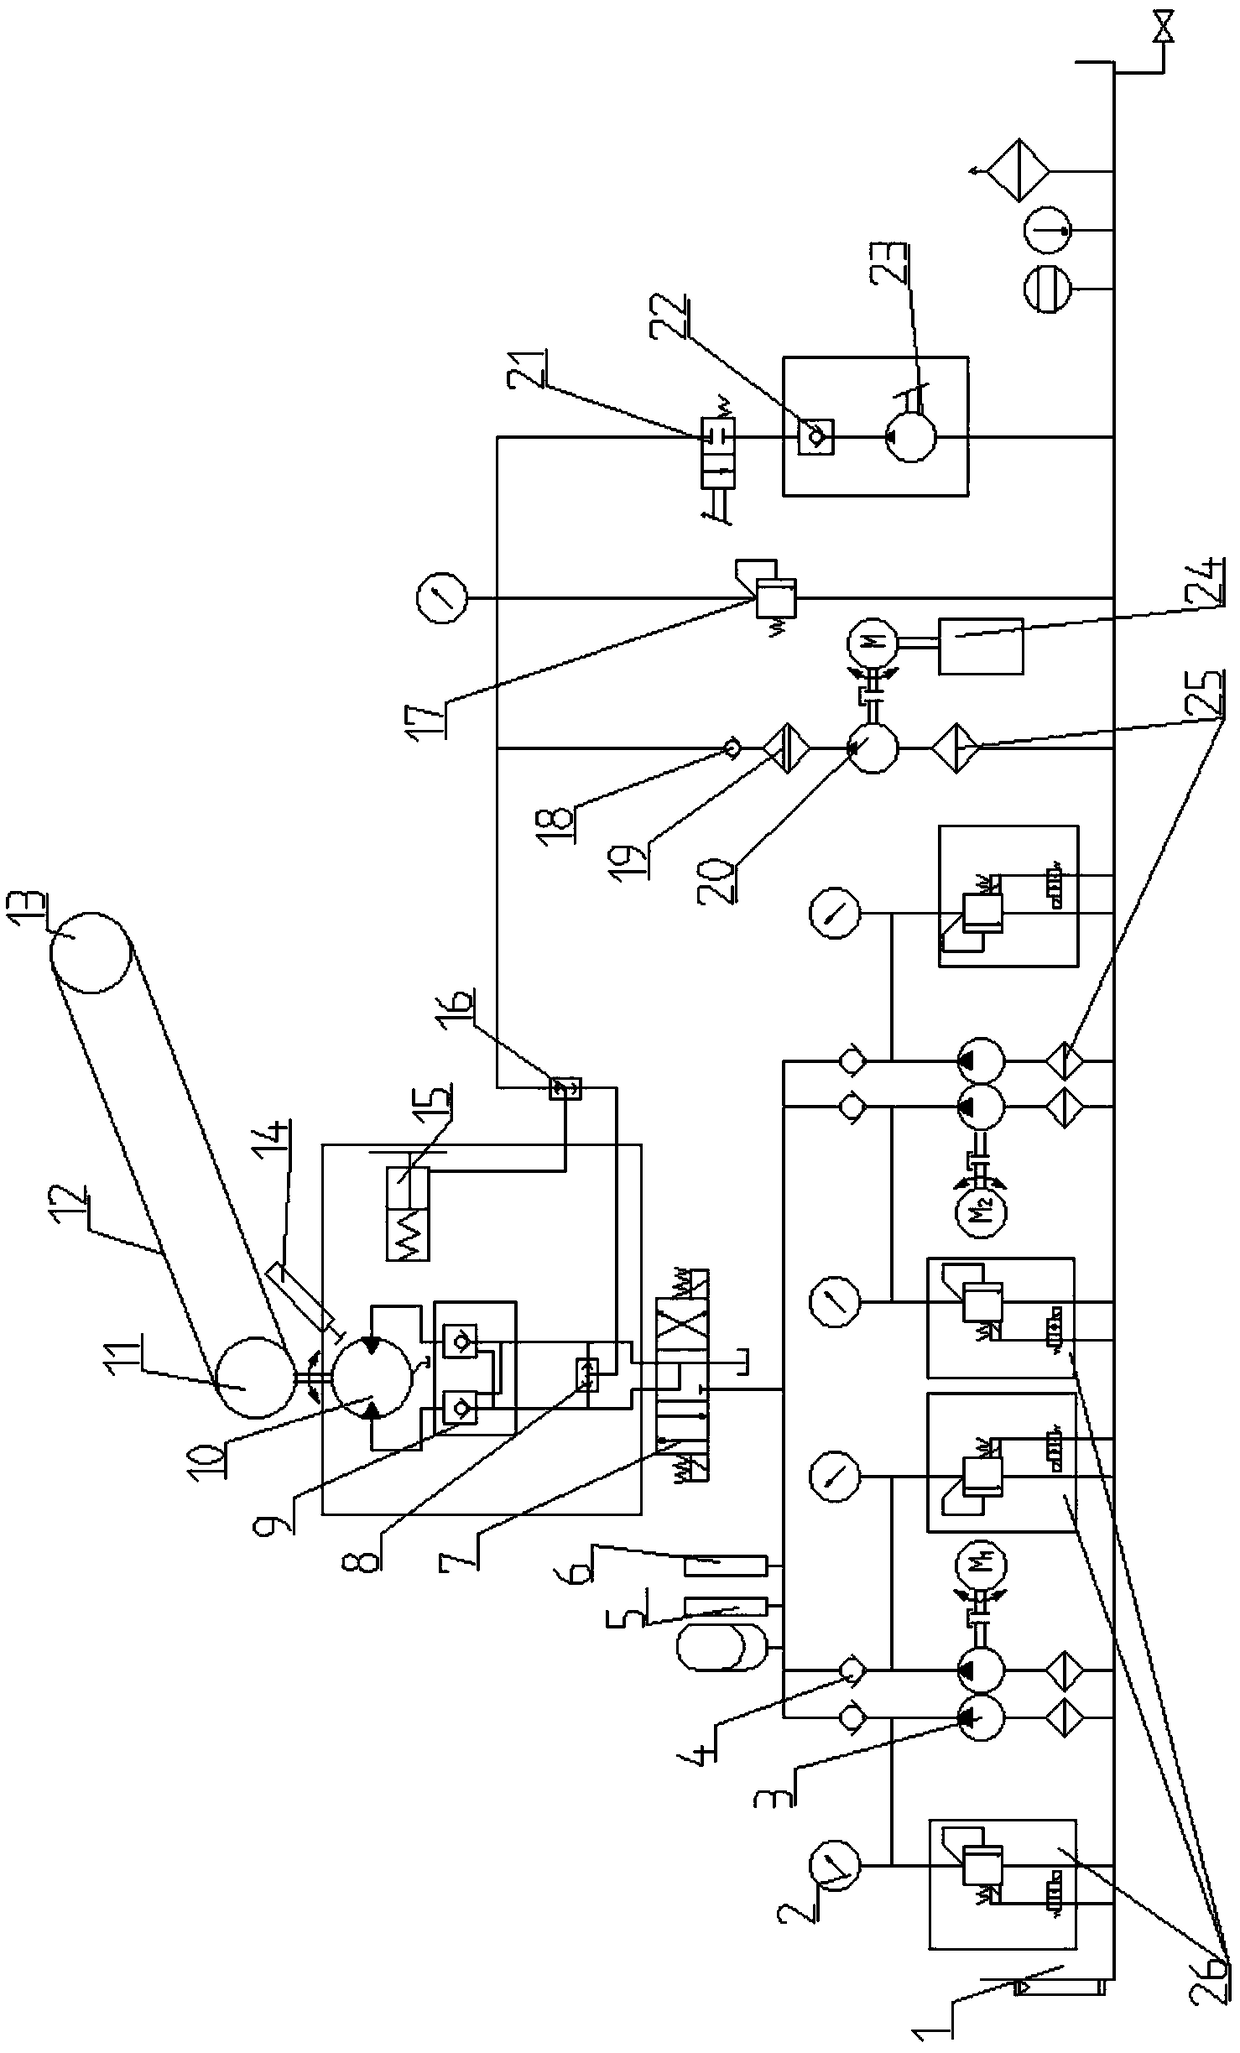 Double-mode driven brake hydraulic control system of belt conveyor